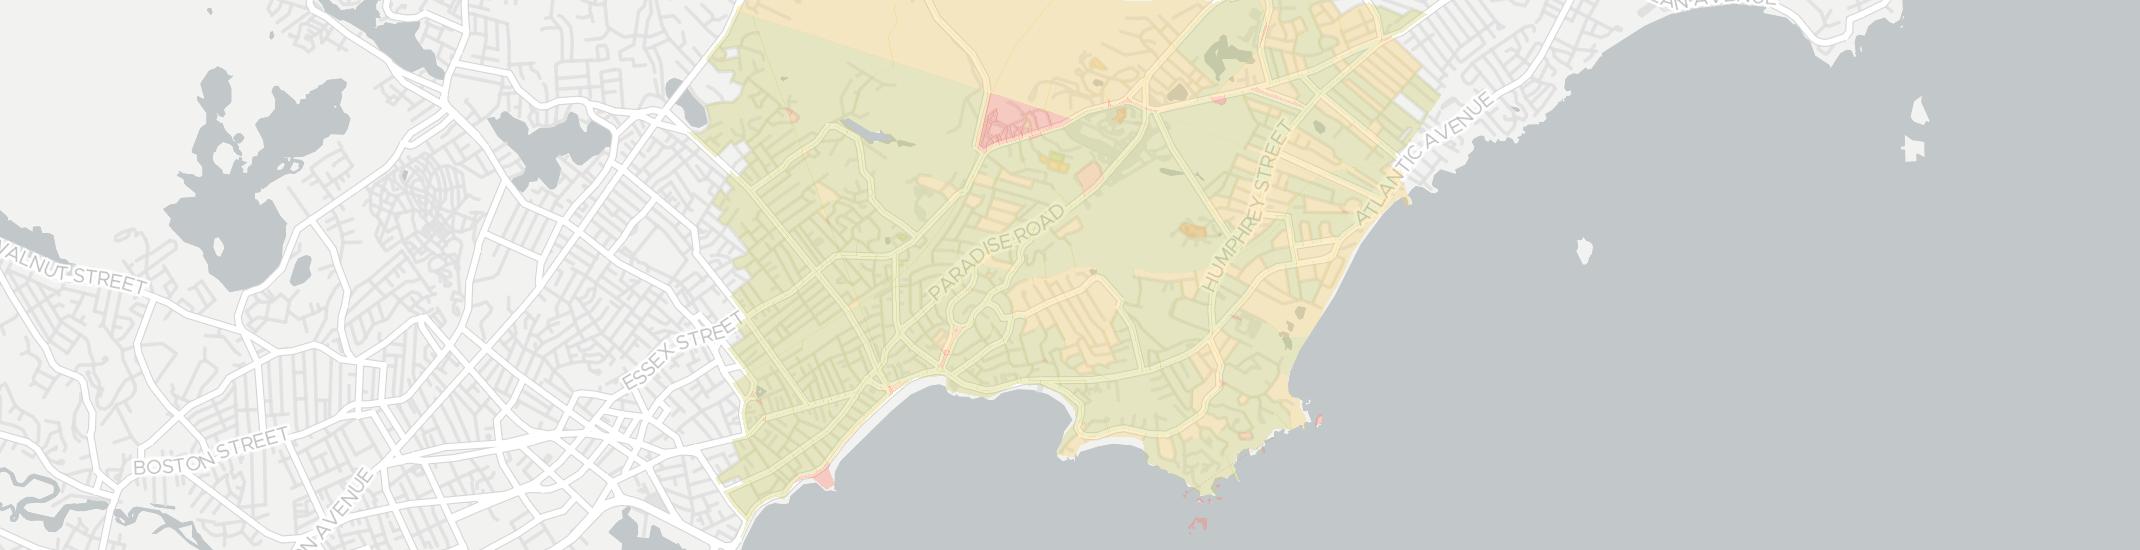 Swampscott Internet Competition Map. Click for interactive map.